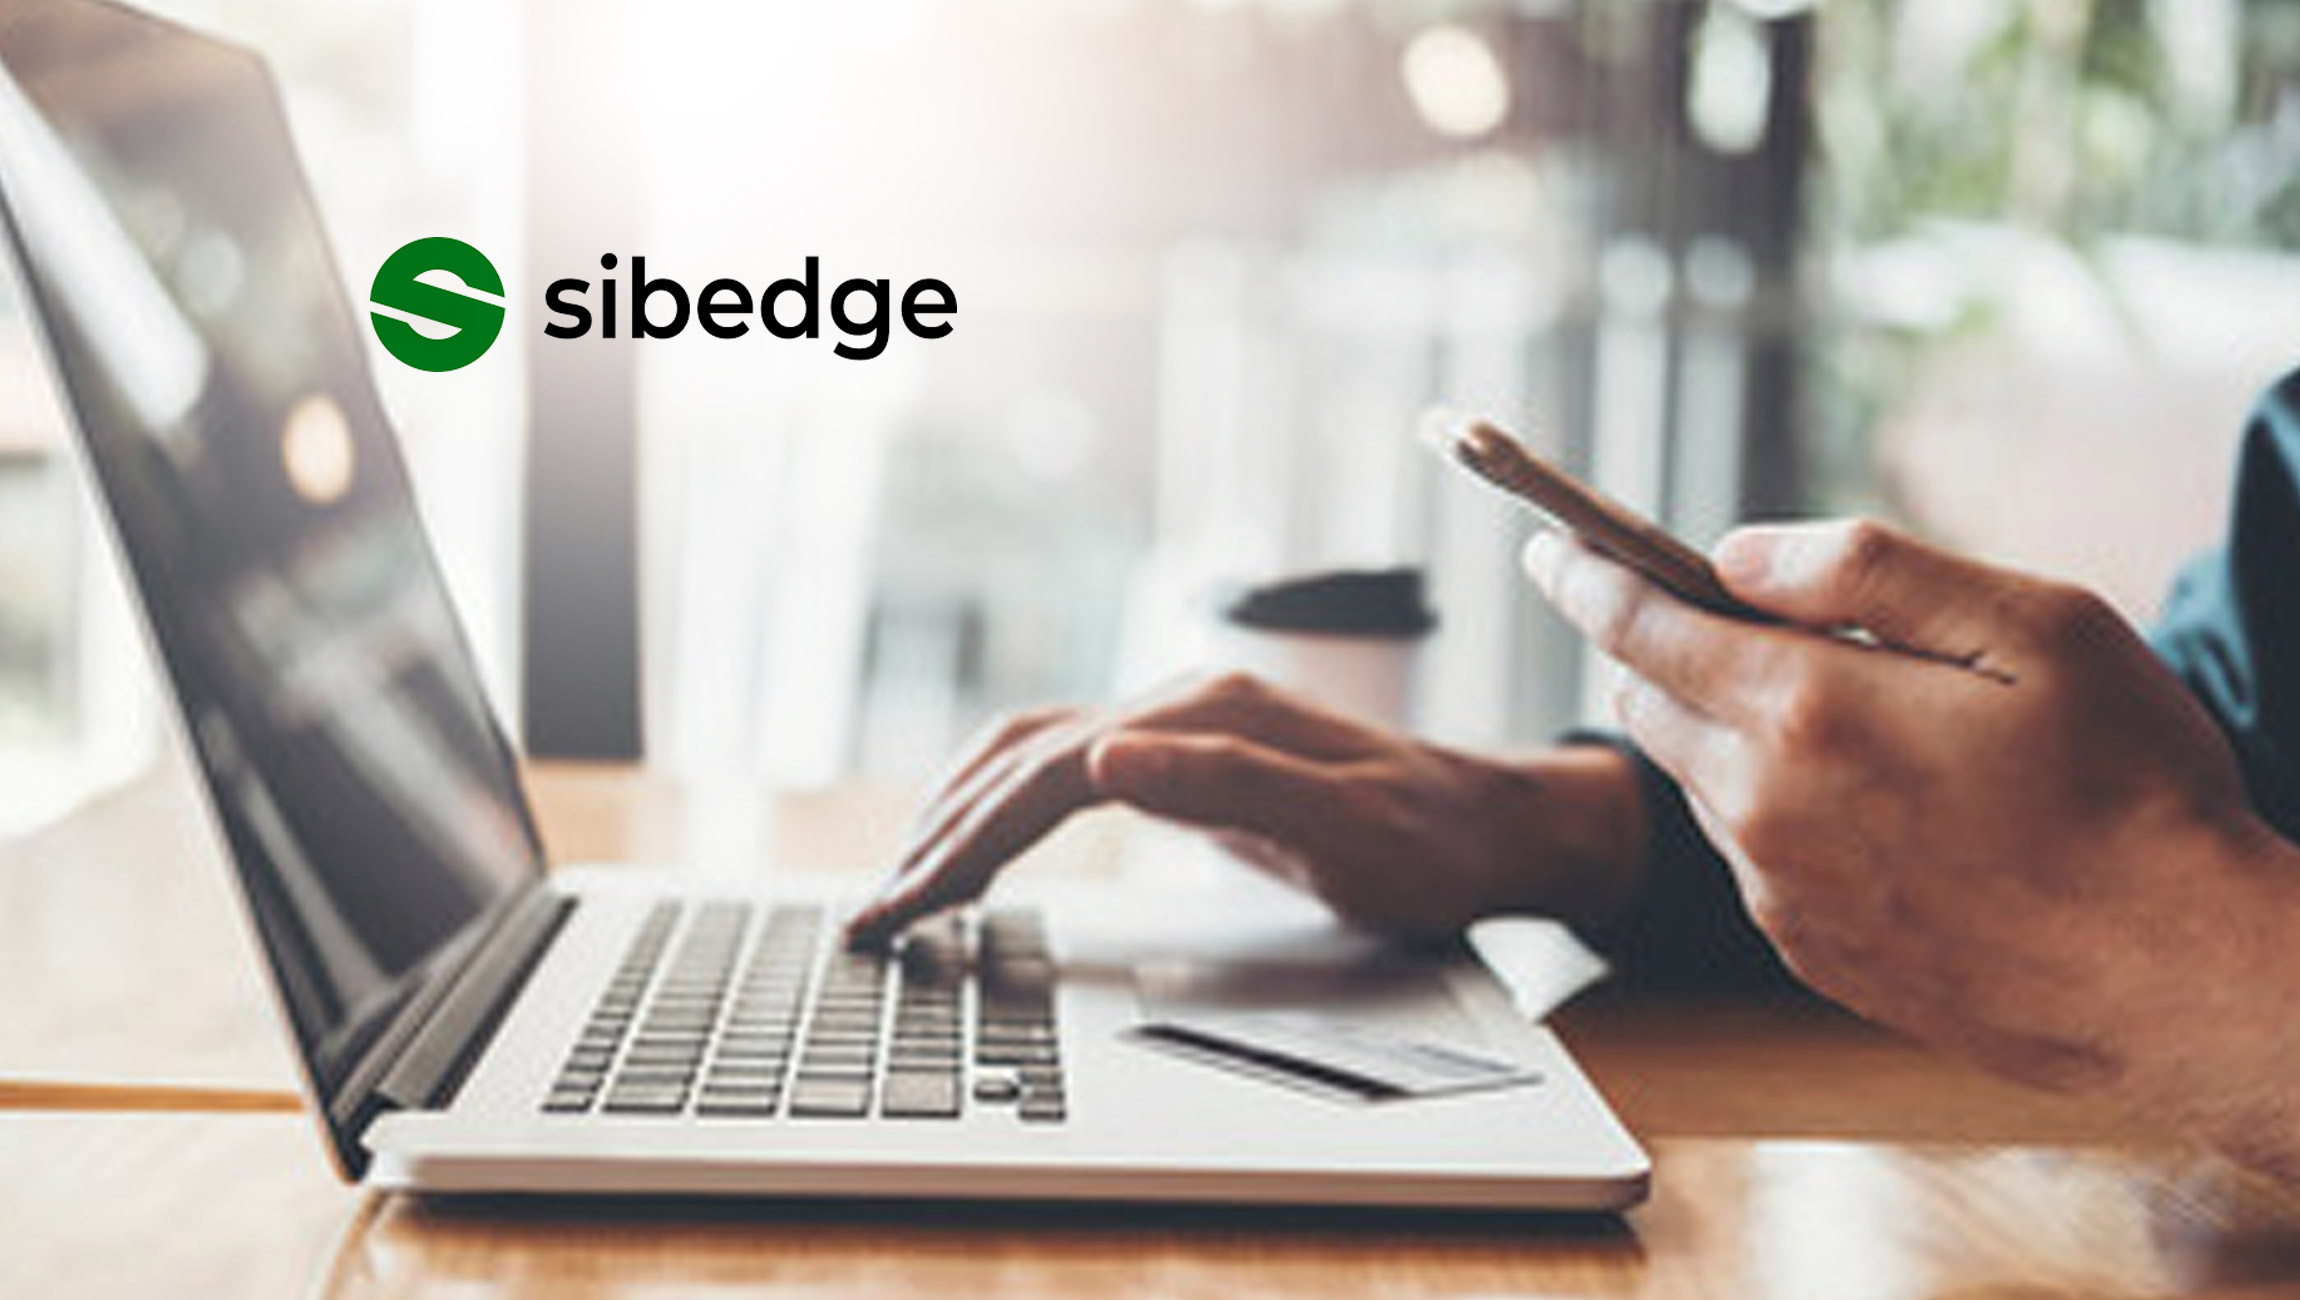 Sibedge, a Software Engineering Company, Adds AI-Powered Virtual Agents, Prebuilt Skills and Templates to Its Implementation Portfolio